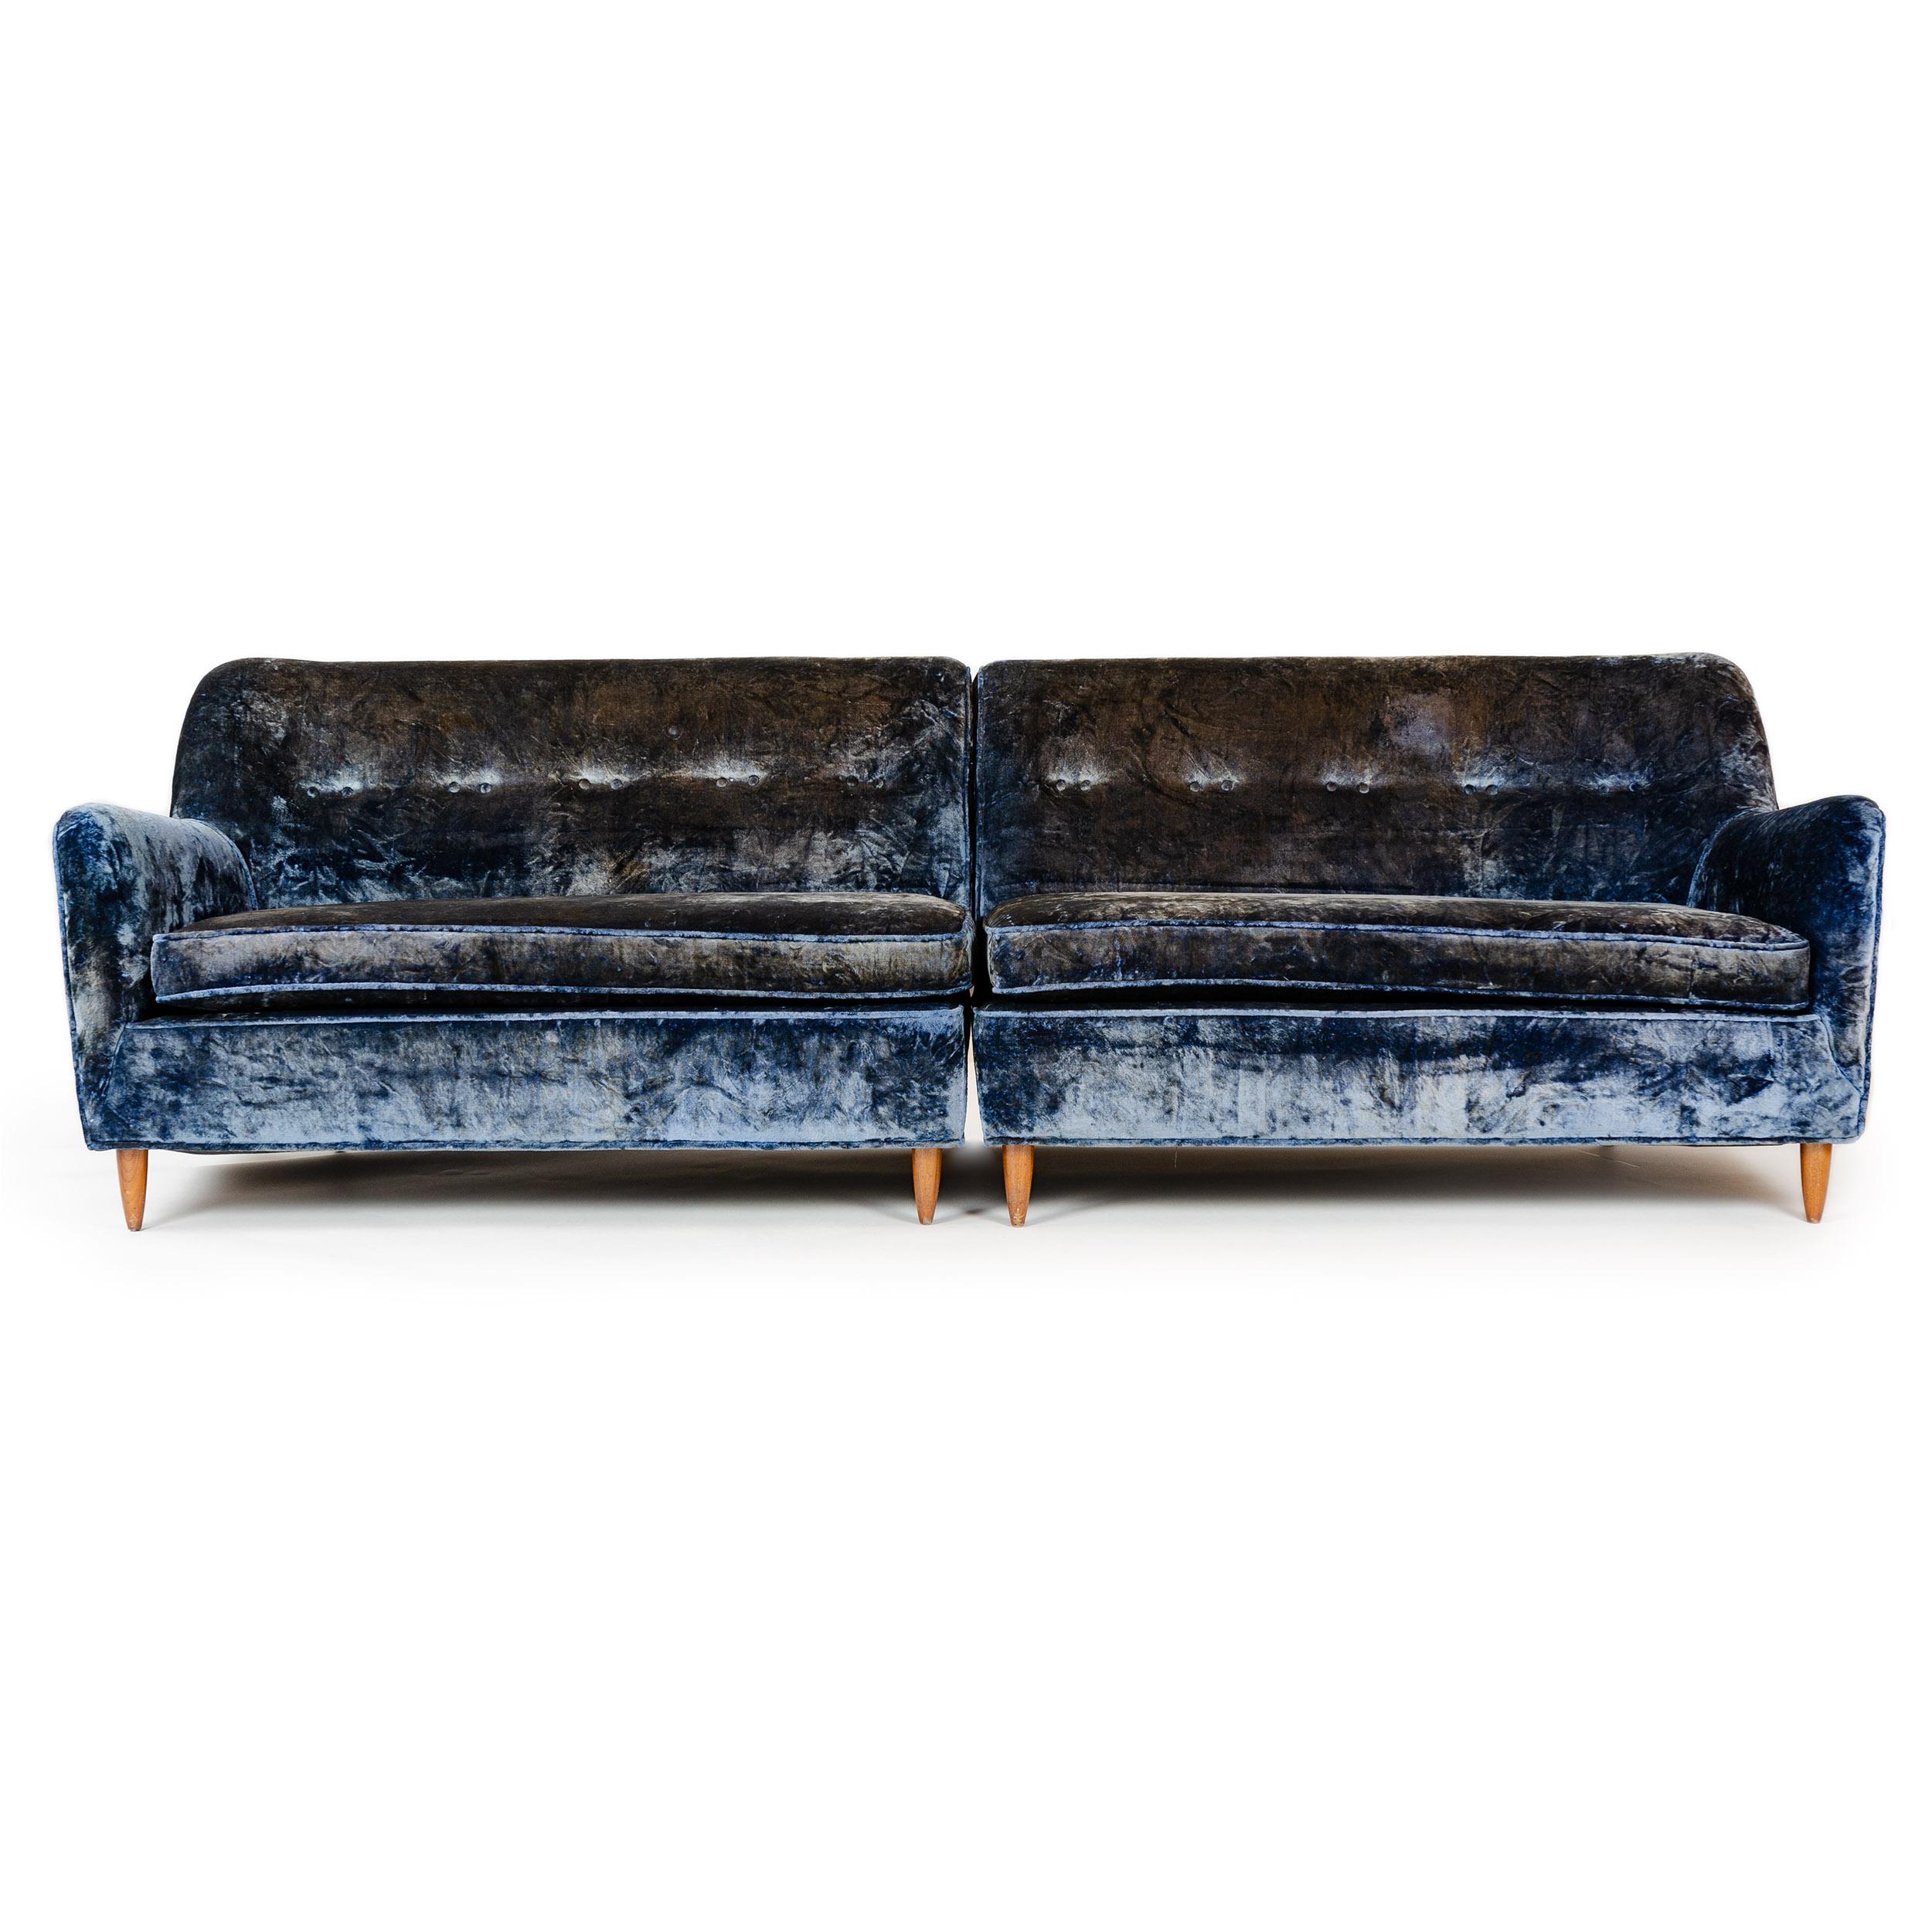 A two-piece tight backed crushed blue velvet sofa retaining original upholstery.